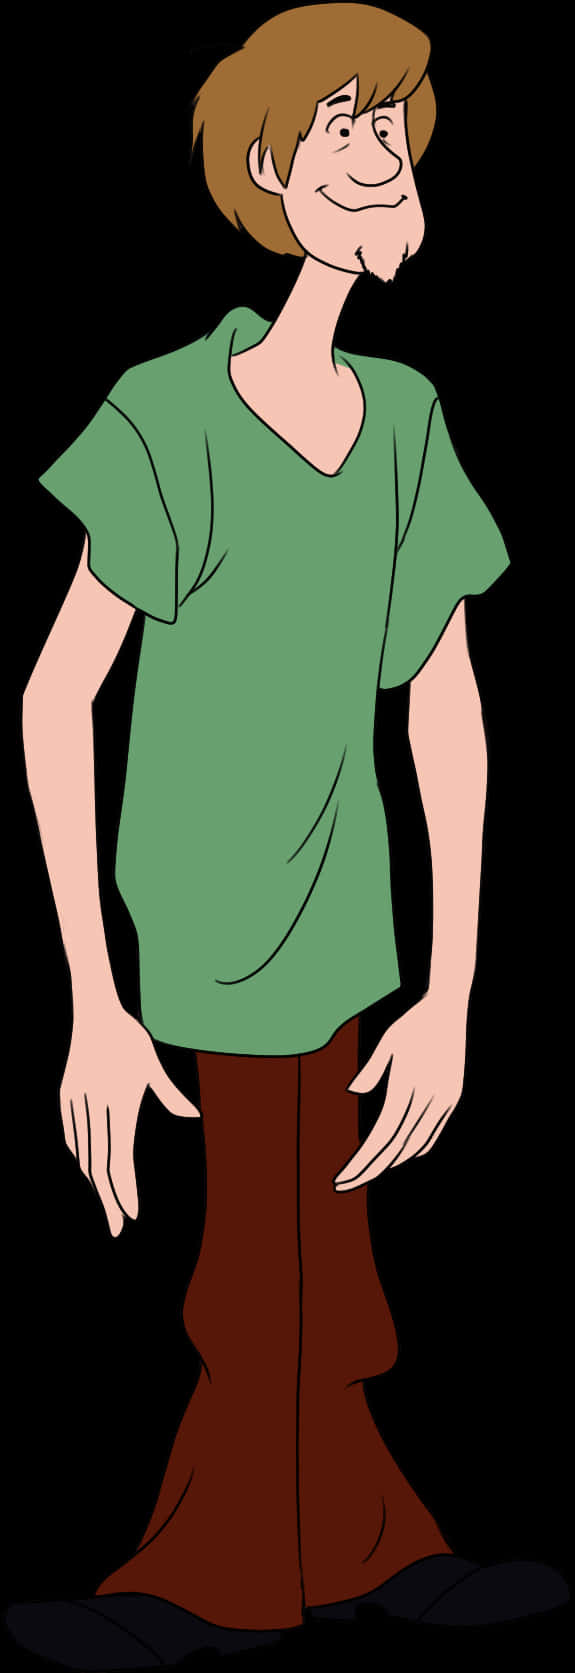 Shaggy Rogers, a lovable team member of Scooby Doo. Wallpaper